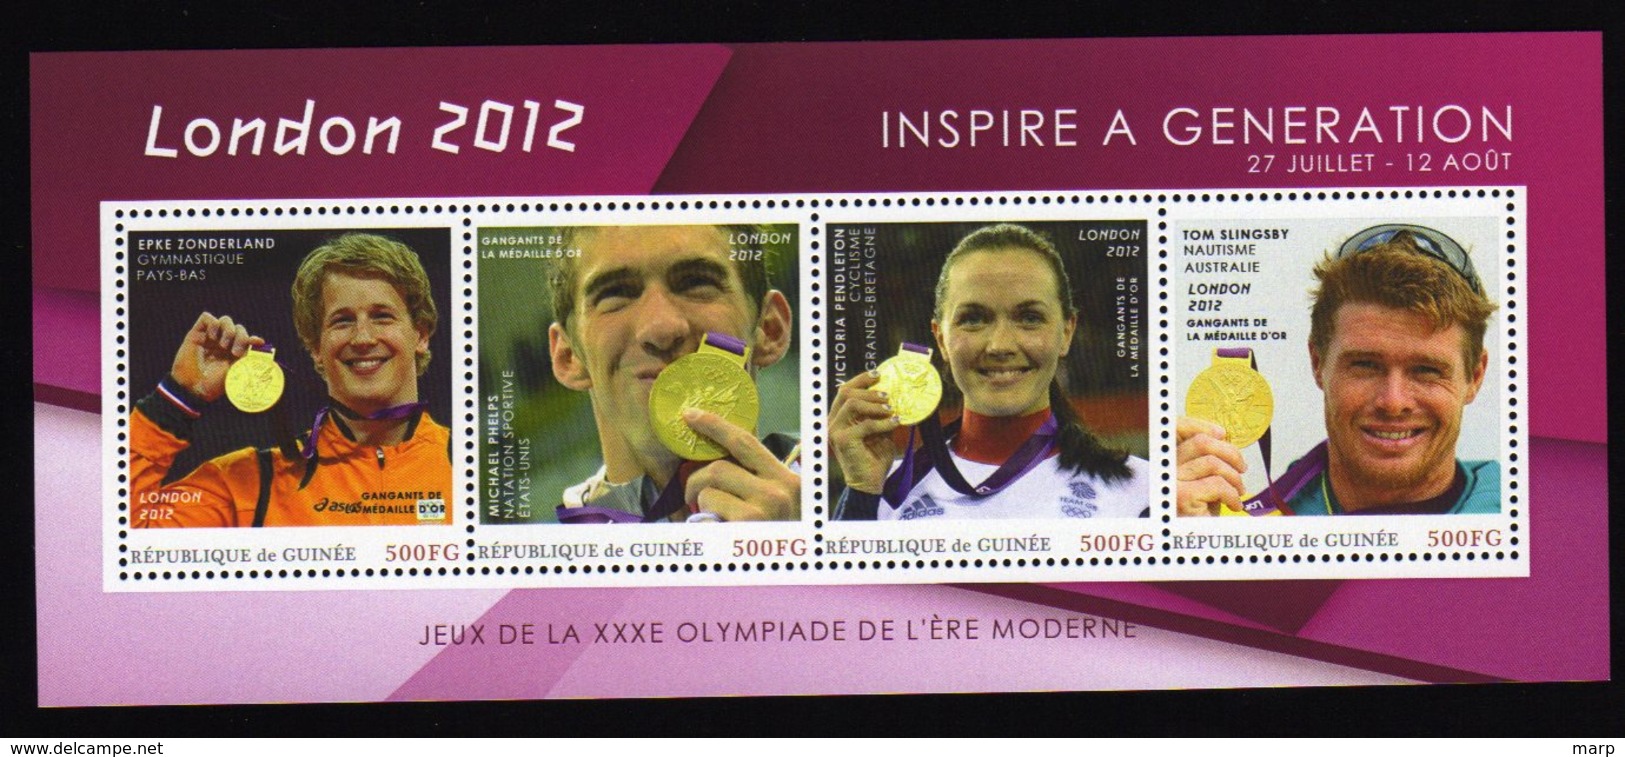 Londen 2012 Olympics Sheet From Guinee With Gold Medal Epke Zonderland,Victoria Pendleton And More - Sommer 2012: London